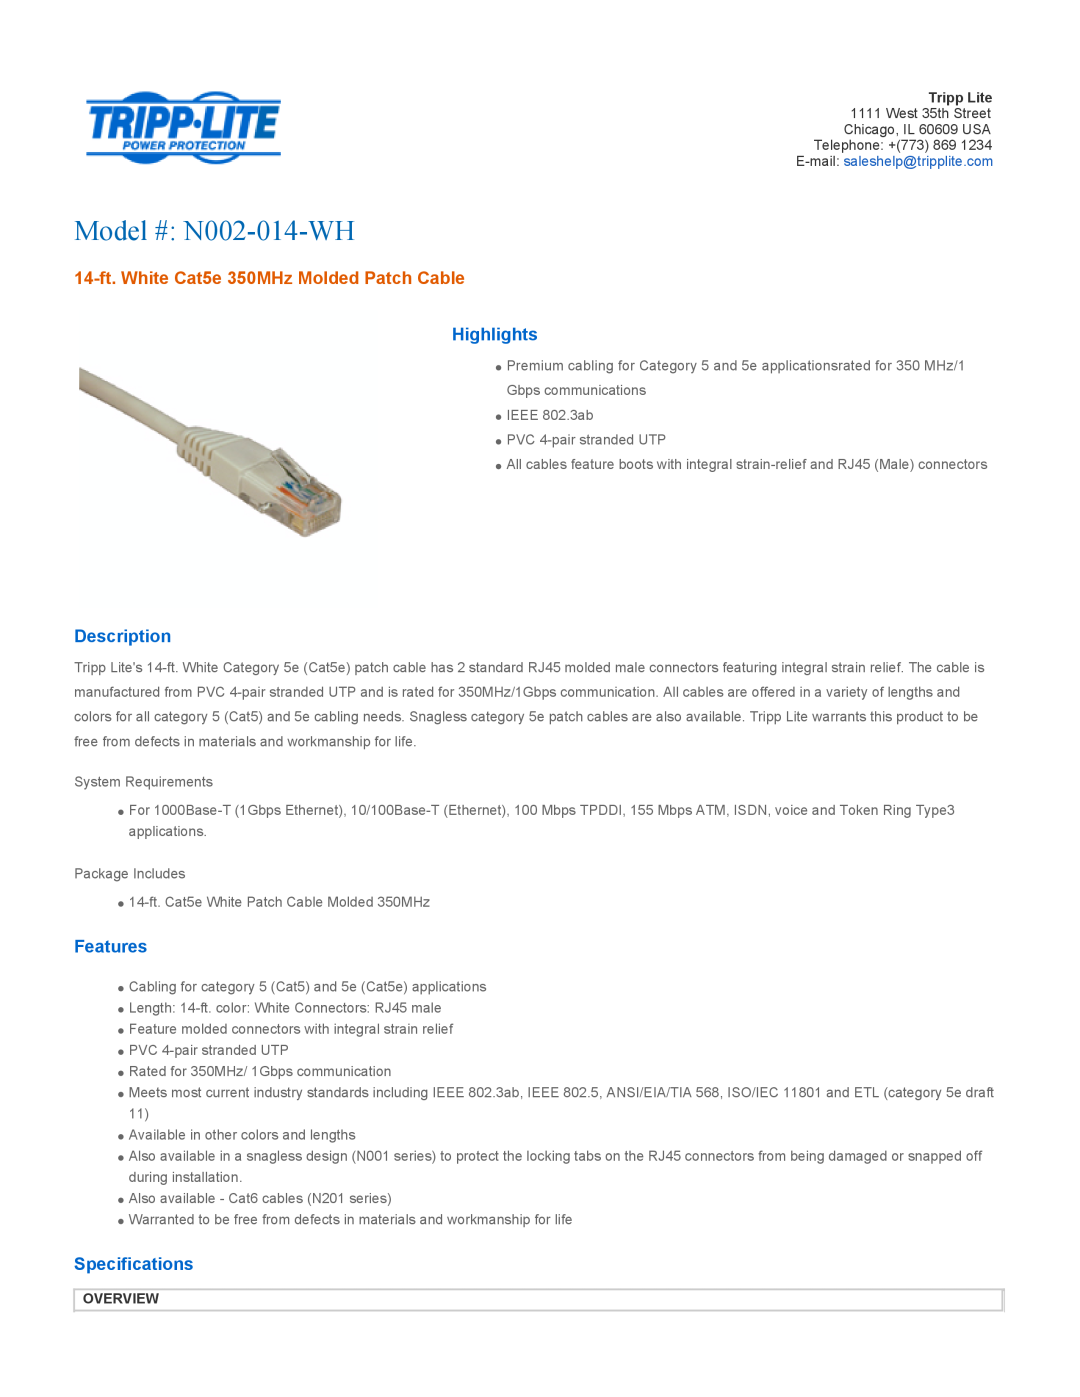 Tripp Lite specifications Overview, Model # N002-014-WH, 14-ft. White Cat5e 350MHz Molded Patch Cable, Highlights 